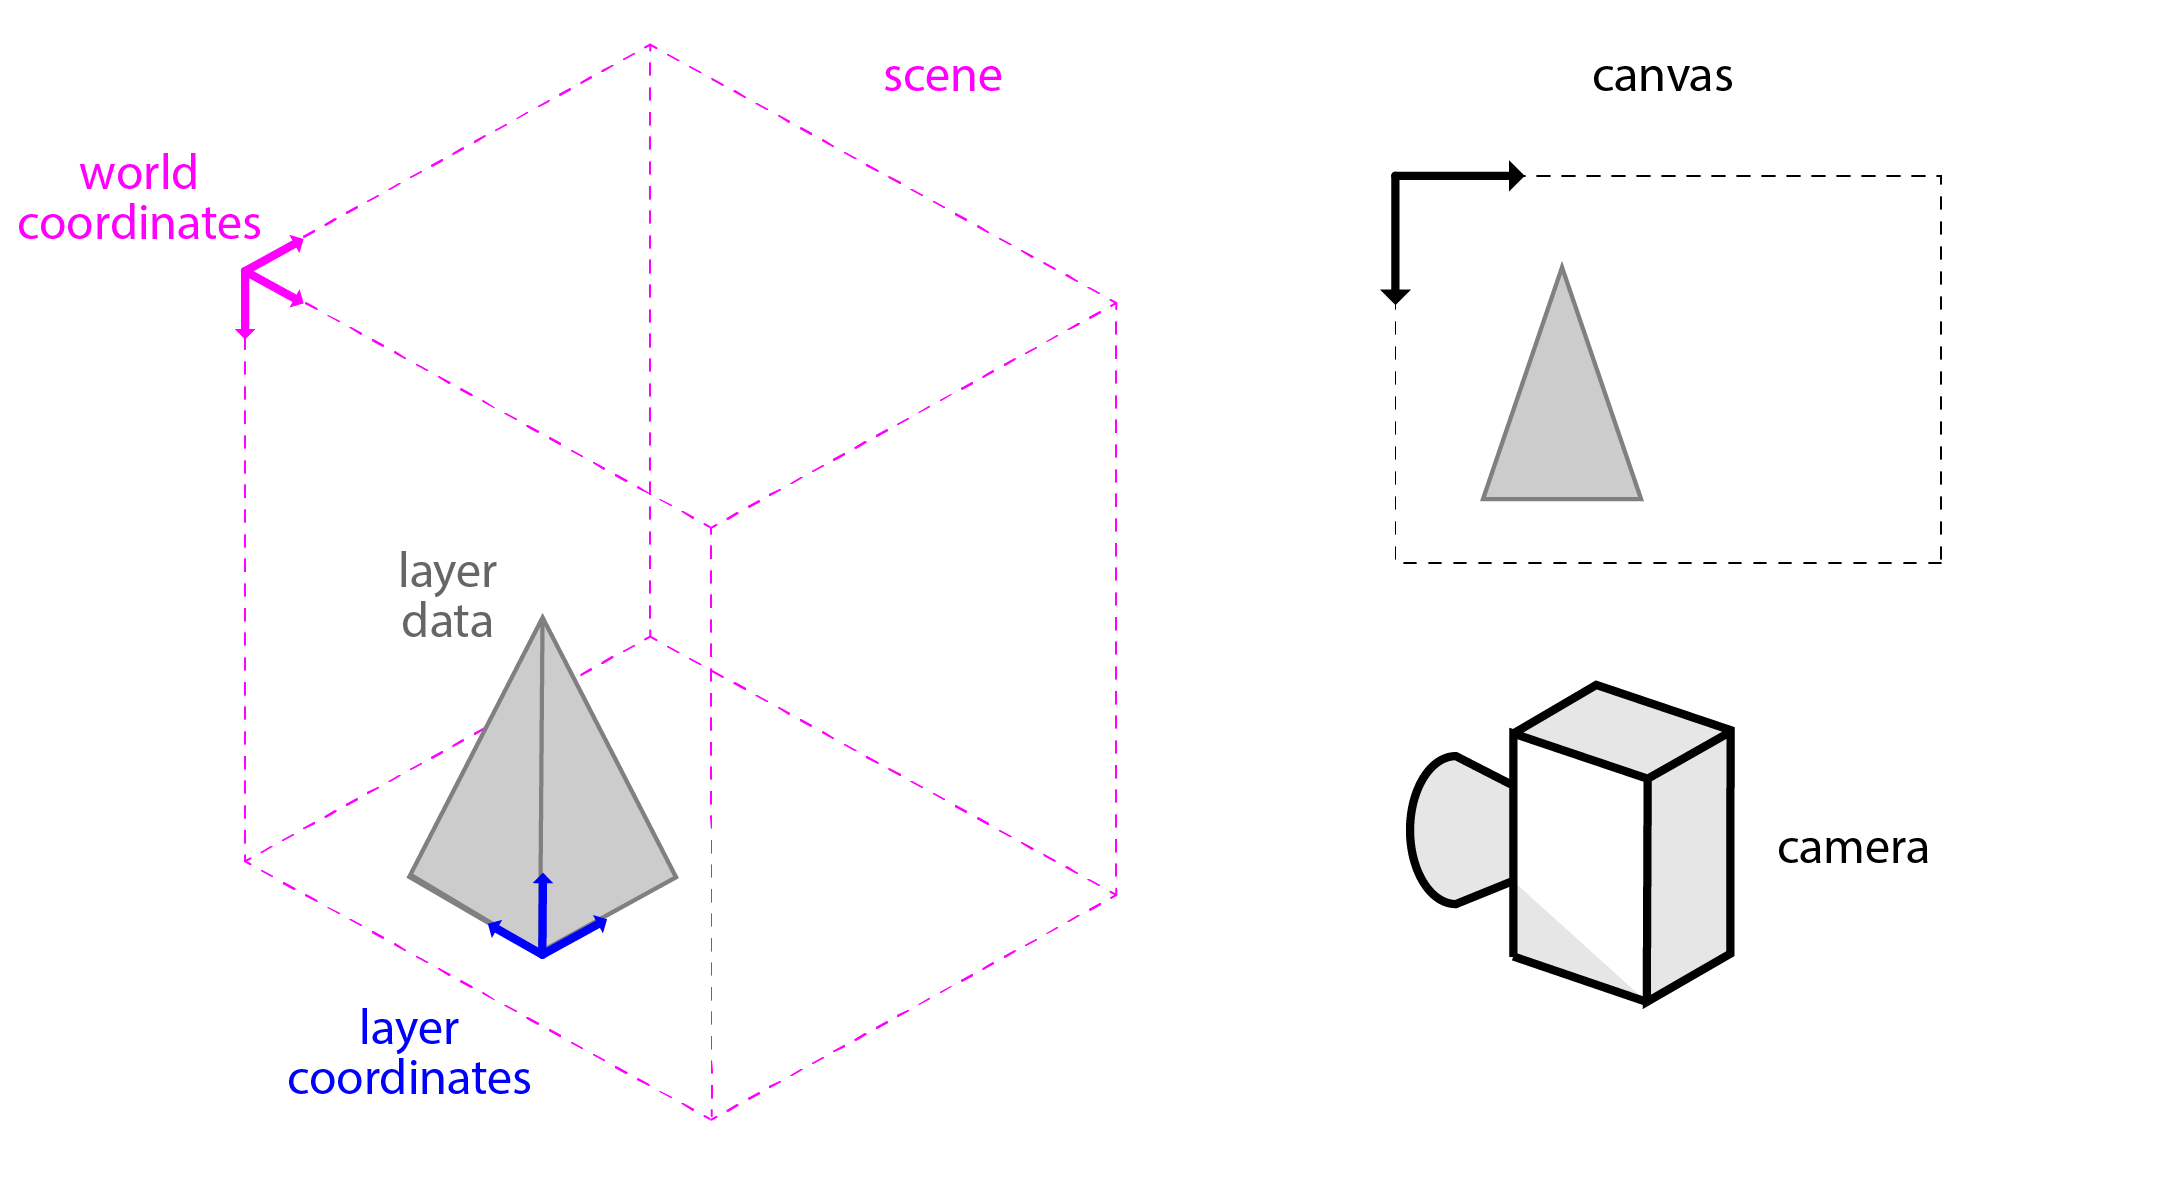 A diagram of the coordinate systems and components involved when interacting with layers in napari. The camera faces the 3D scene to generate a 2D image that is presented on the canvas.